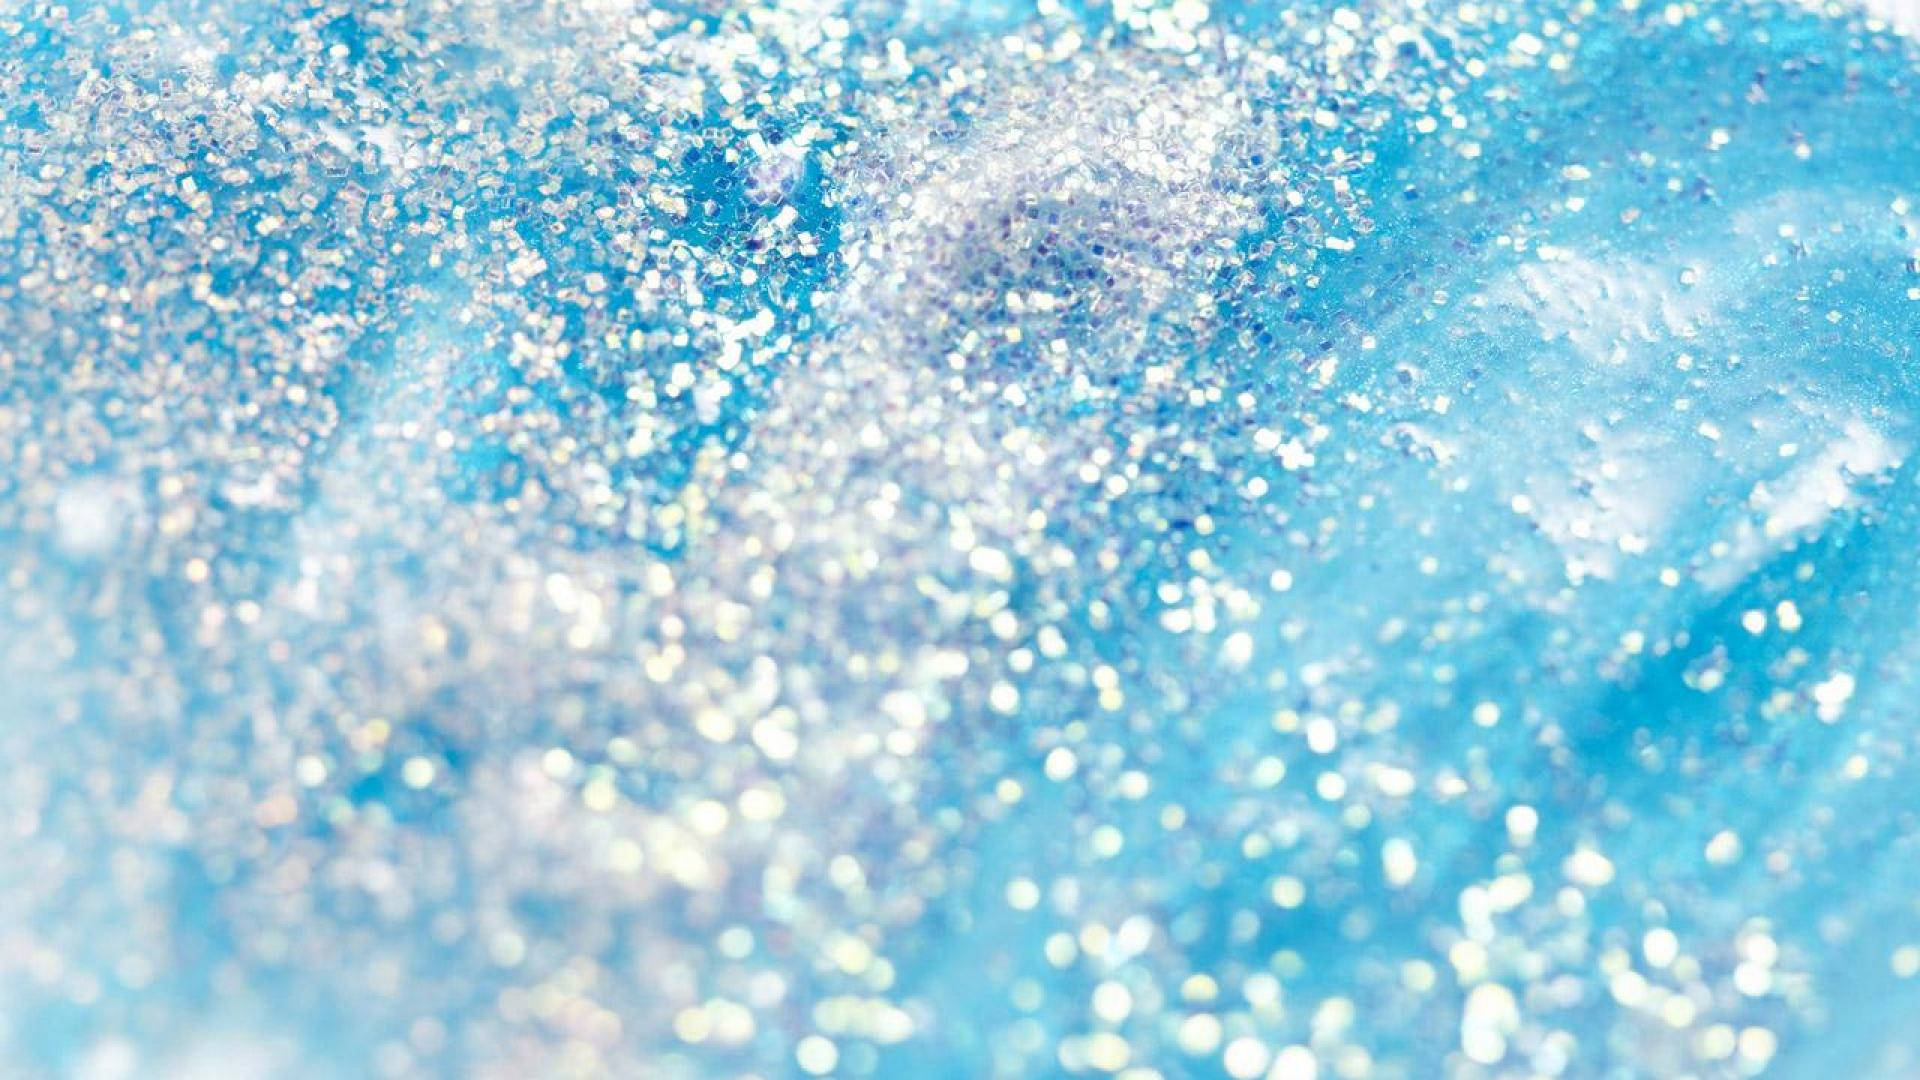 Sparkly Silver Glitters On Blue Slime Wallpaper